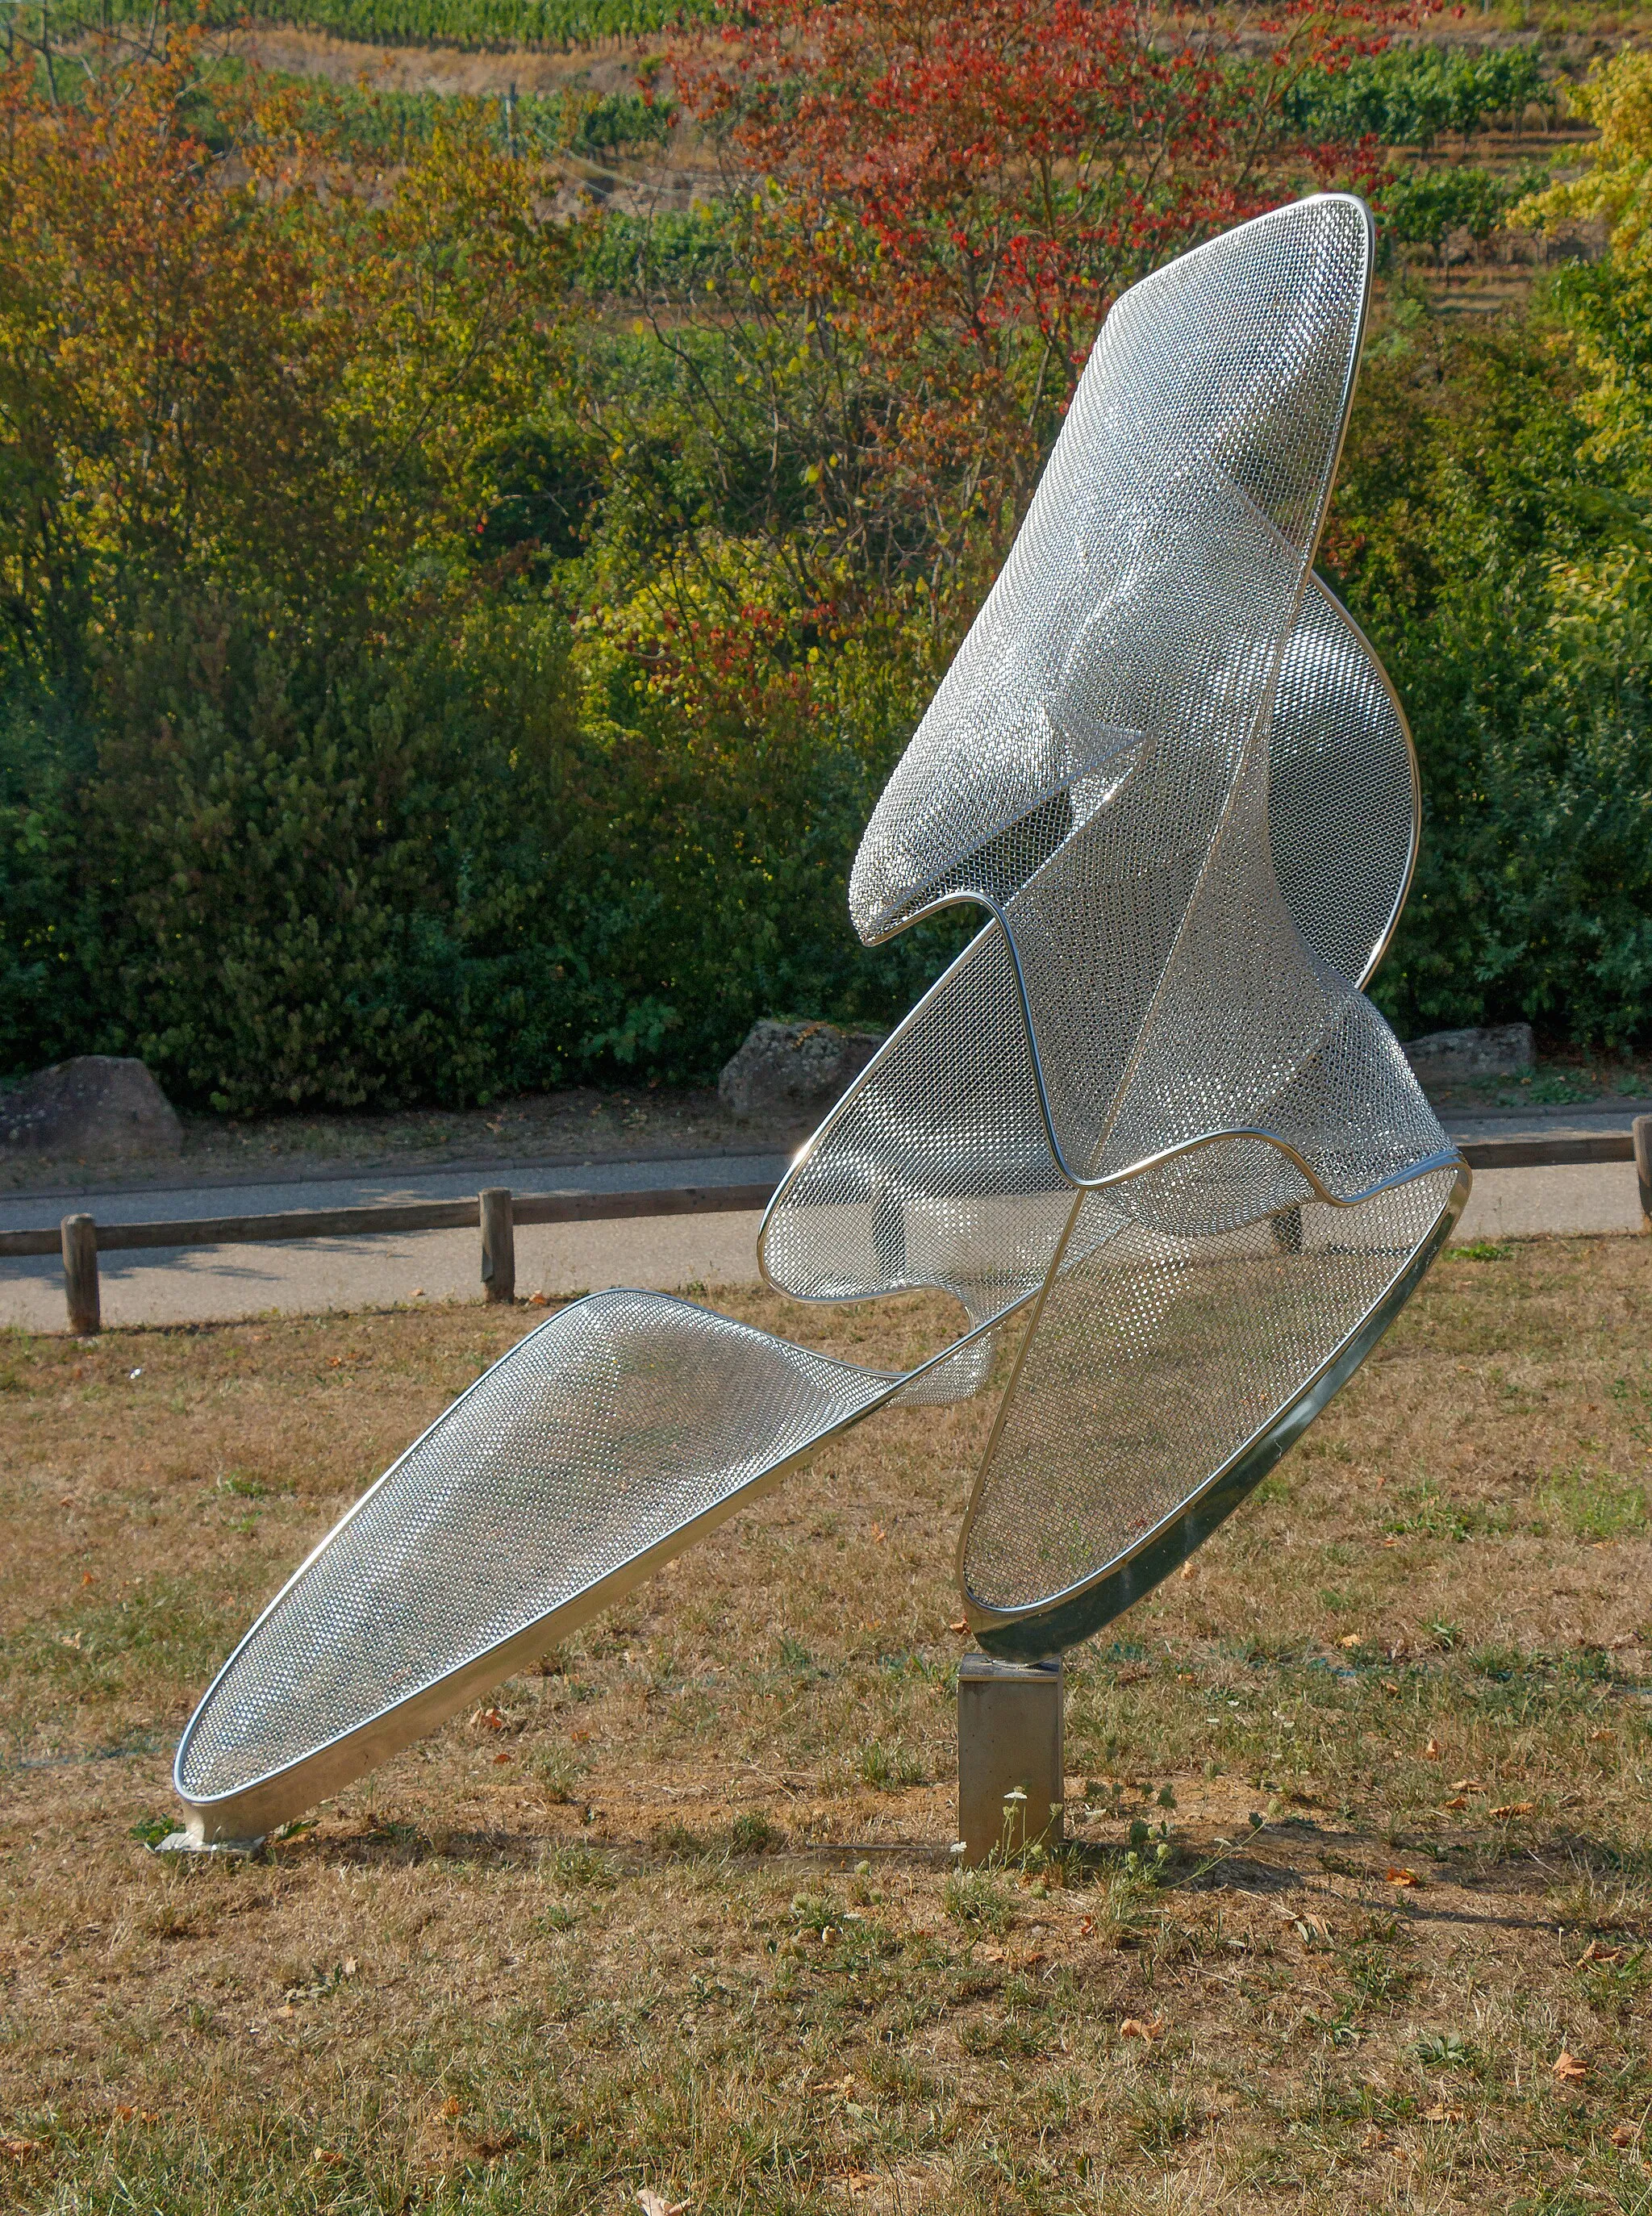 Photo showing: "Mooka" by Axel Anklam, Stainless steel mesh with frame, 2015, Skulpturenweg Maulbronn, Maulbronn, Germany